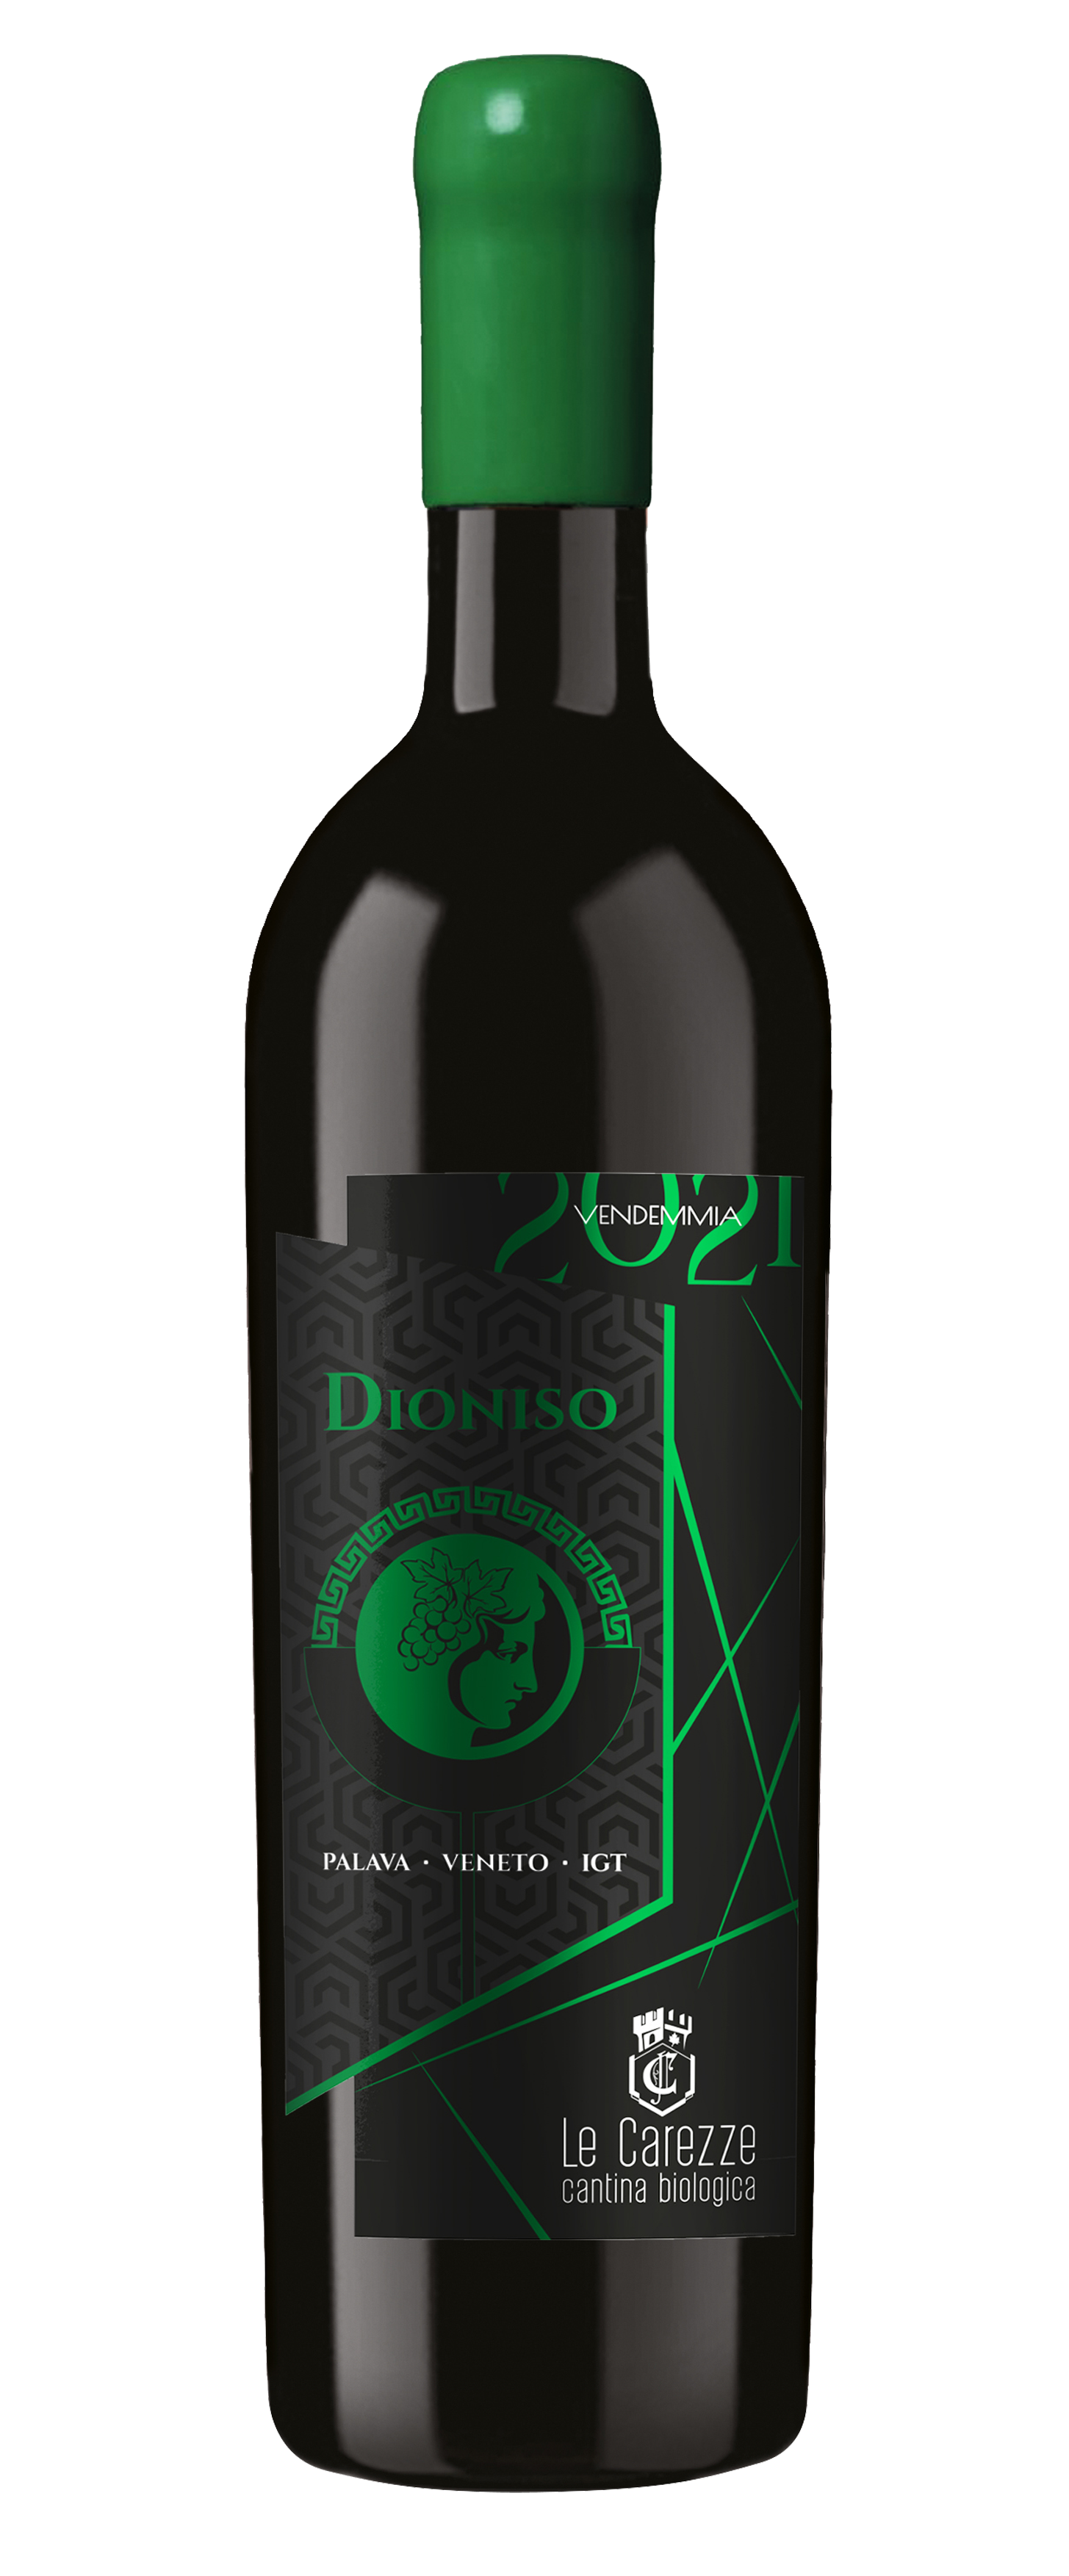 Bottle of wine Dioniso IGT Veneto organic from Palava grapes 2021